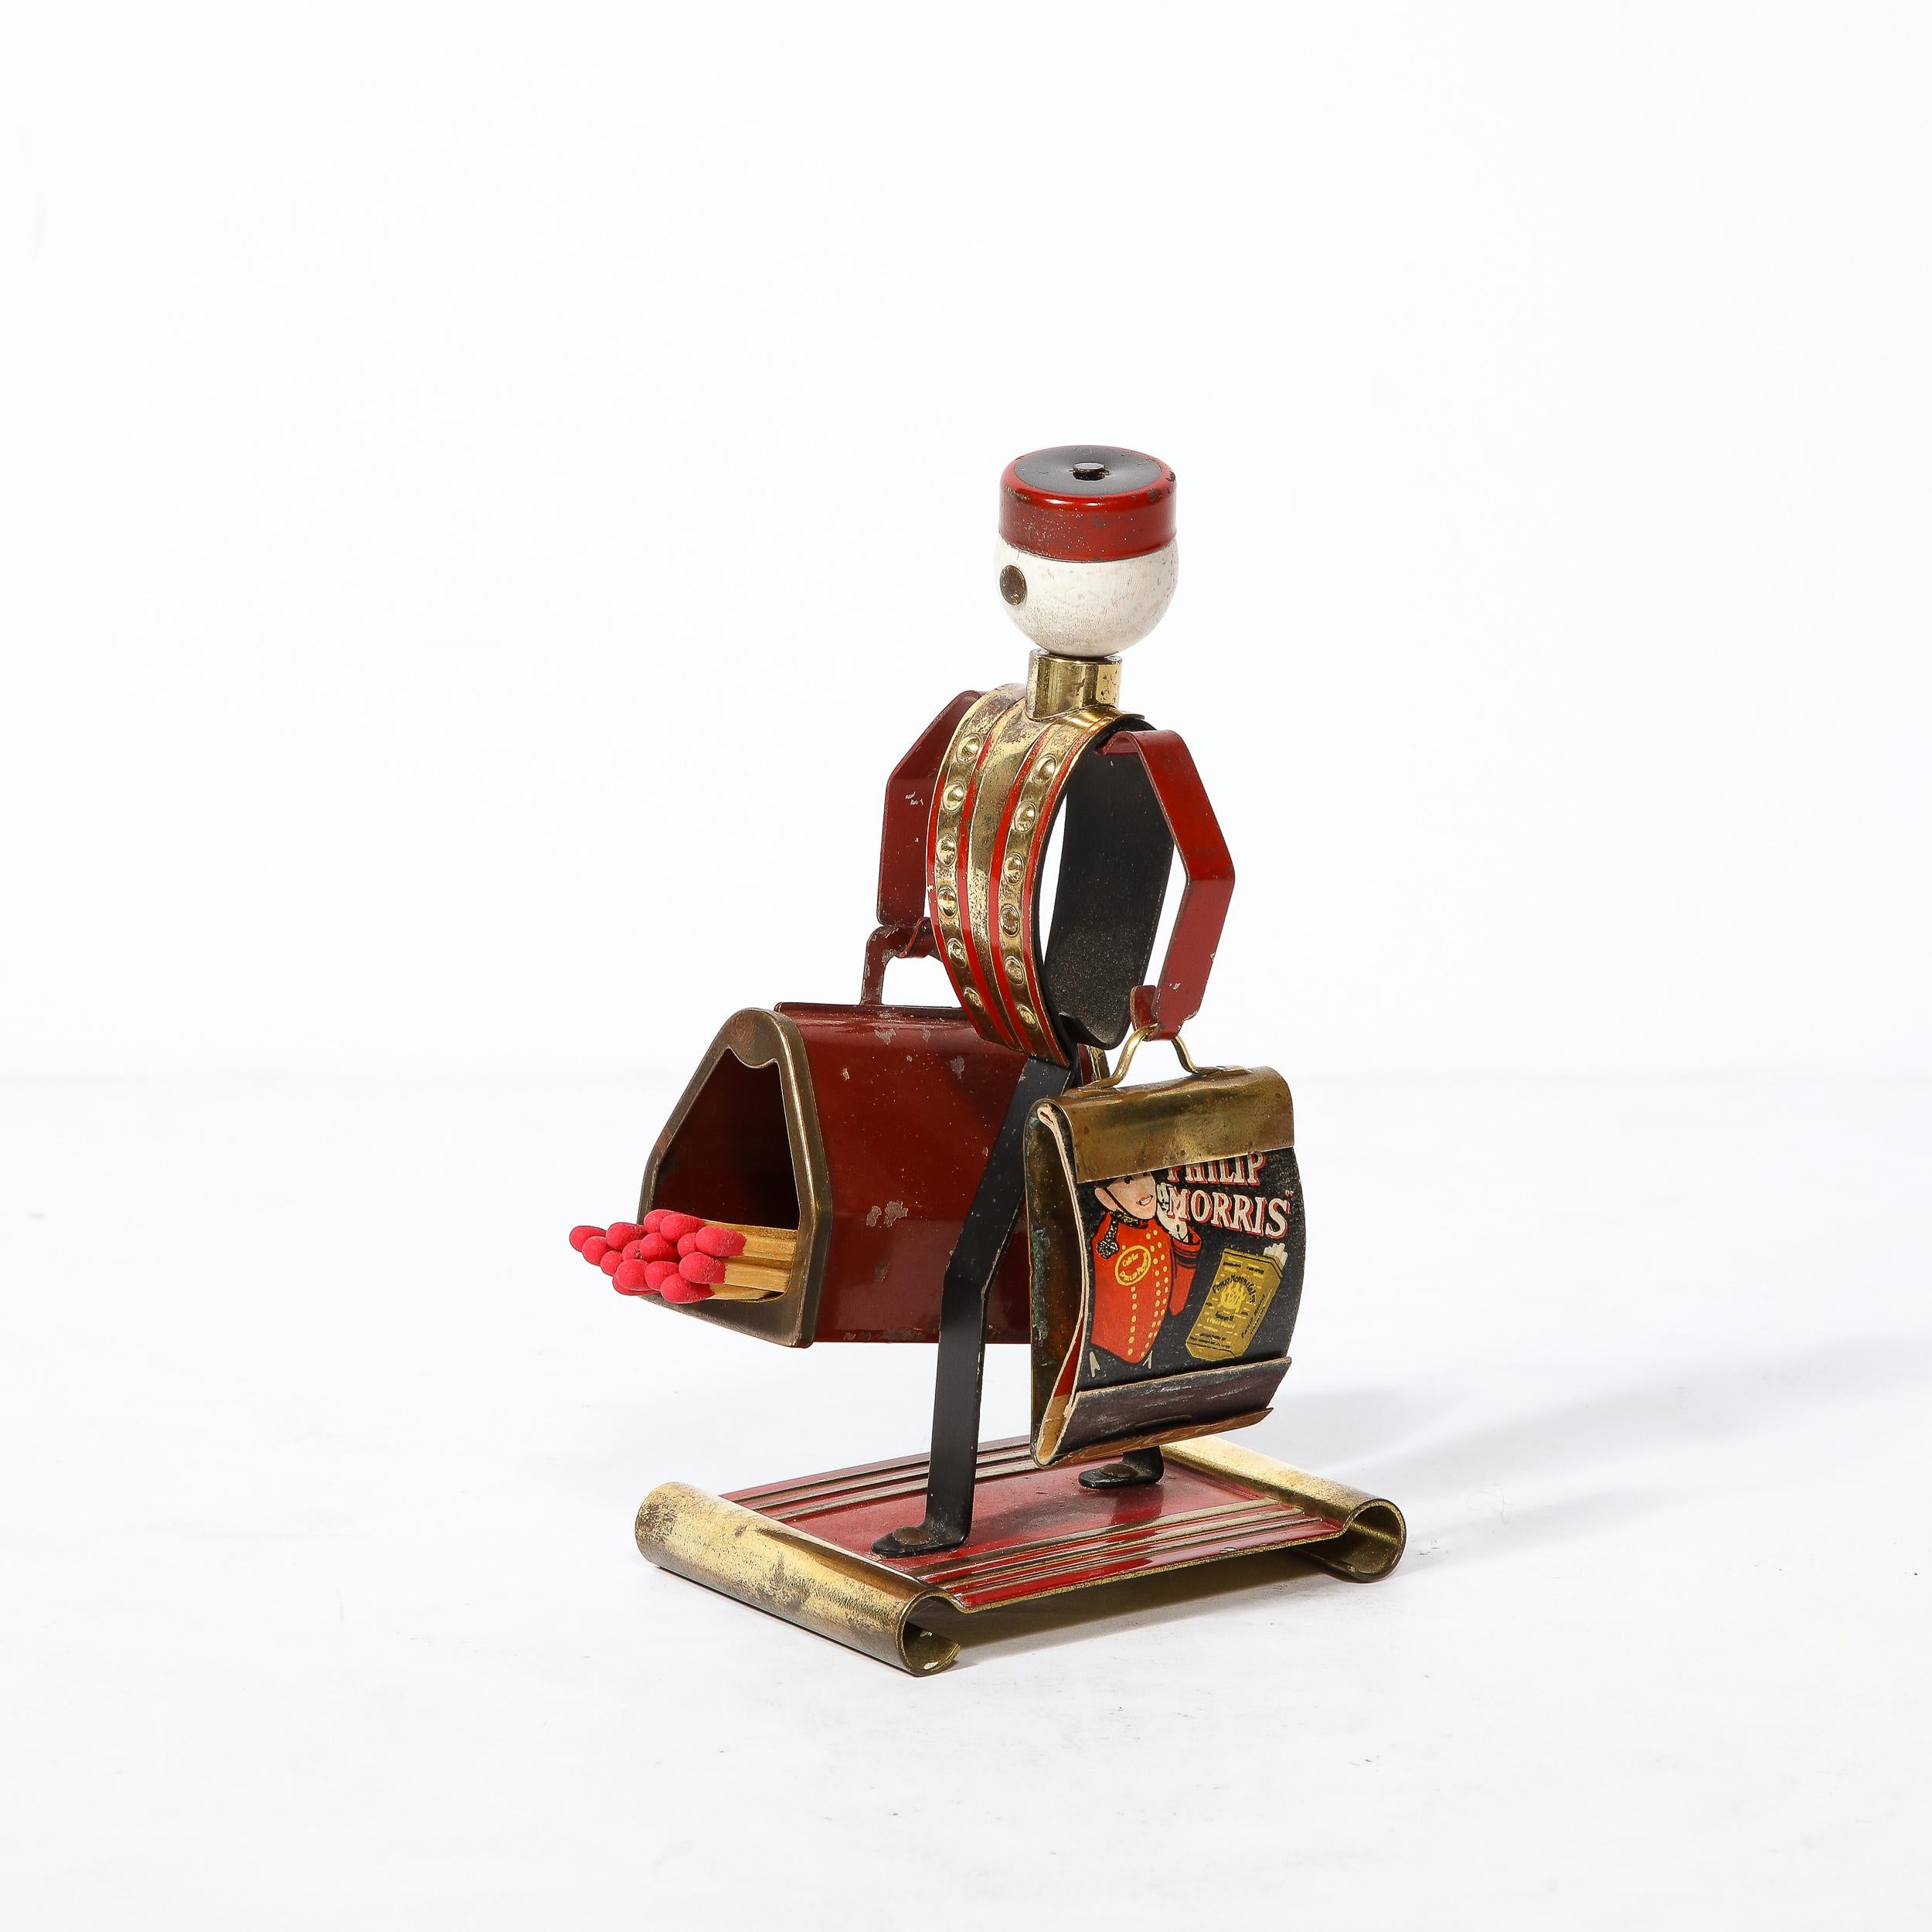 This Art Deco Cigarette/Matchbook Holder in Brass, Oak, and Enamel originates from the United States Circa 1930, manufactured by Chase for Philip Morris. Fabricated in painted brass and oak, this figurine is a rendering of an exceedingly popular